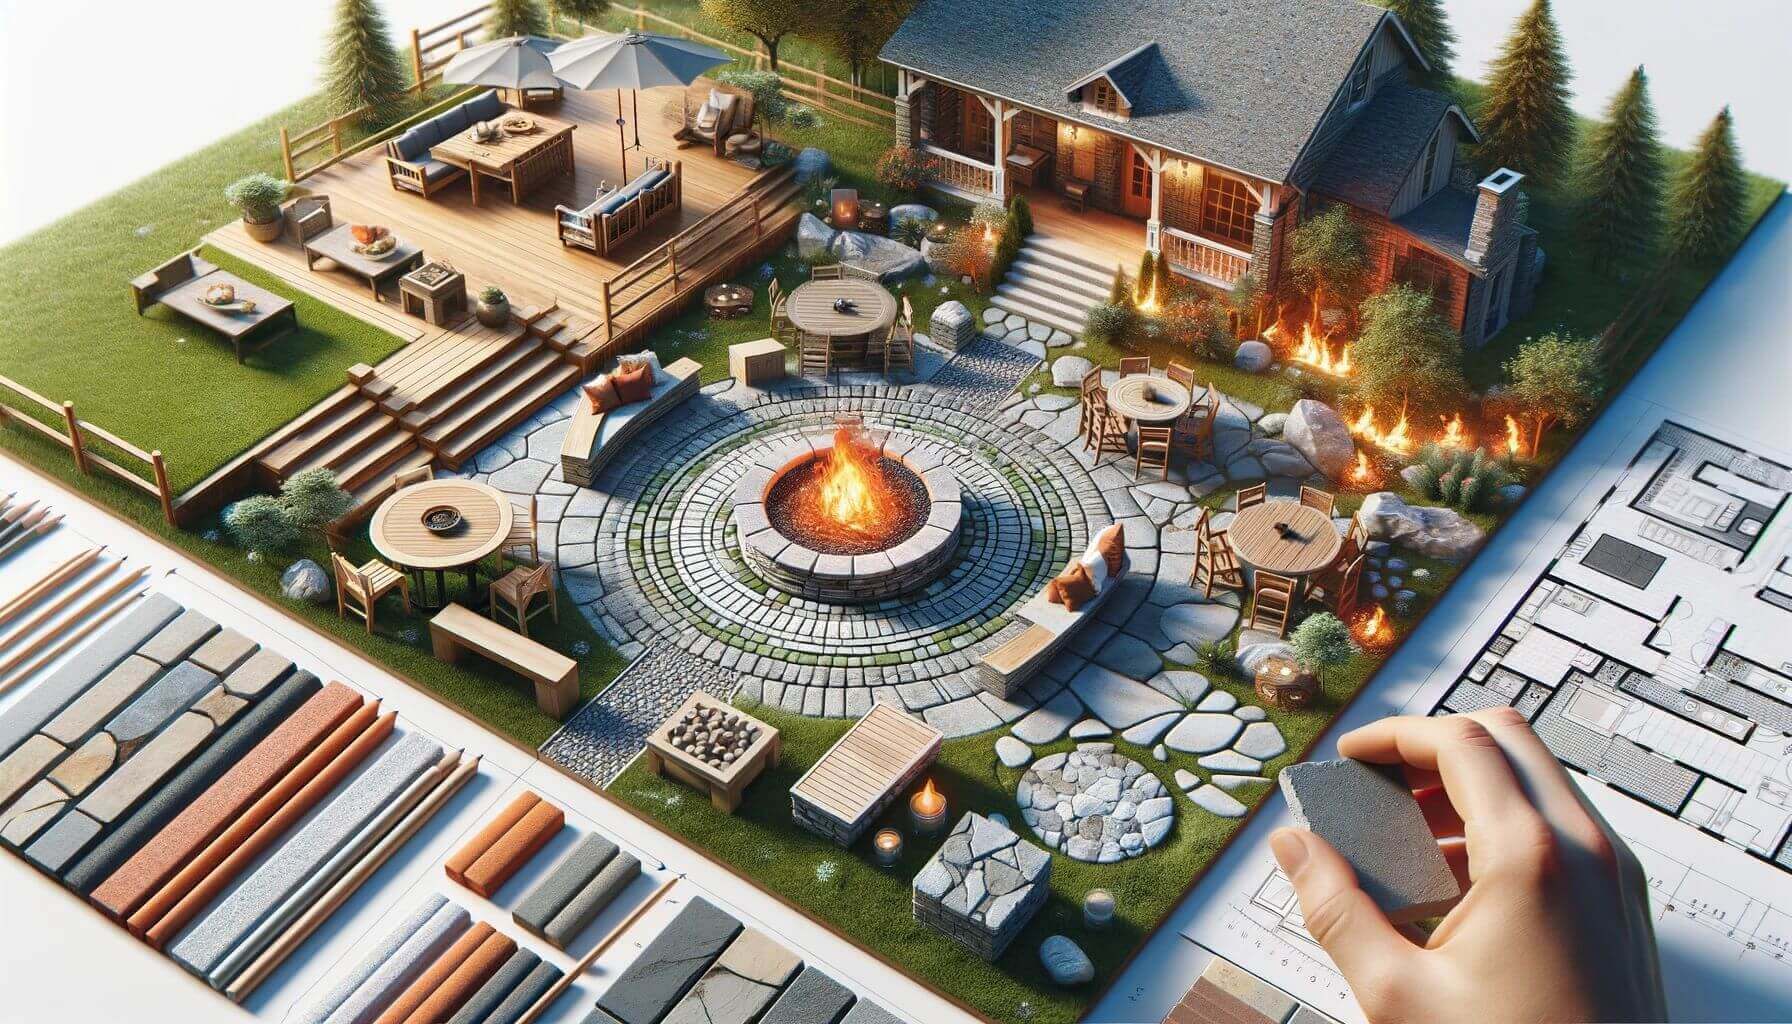 Crafting Cozy Outdoors with Masonry Fire Pit Tips